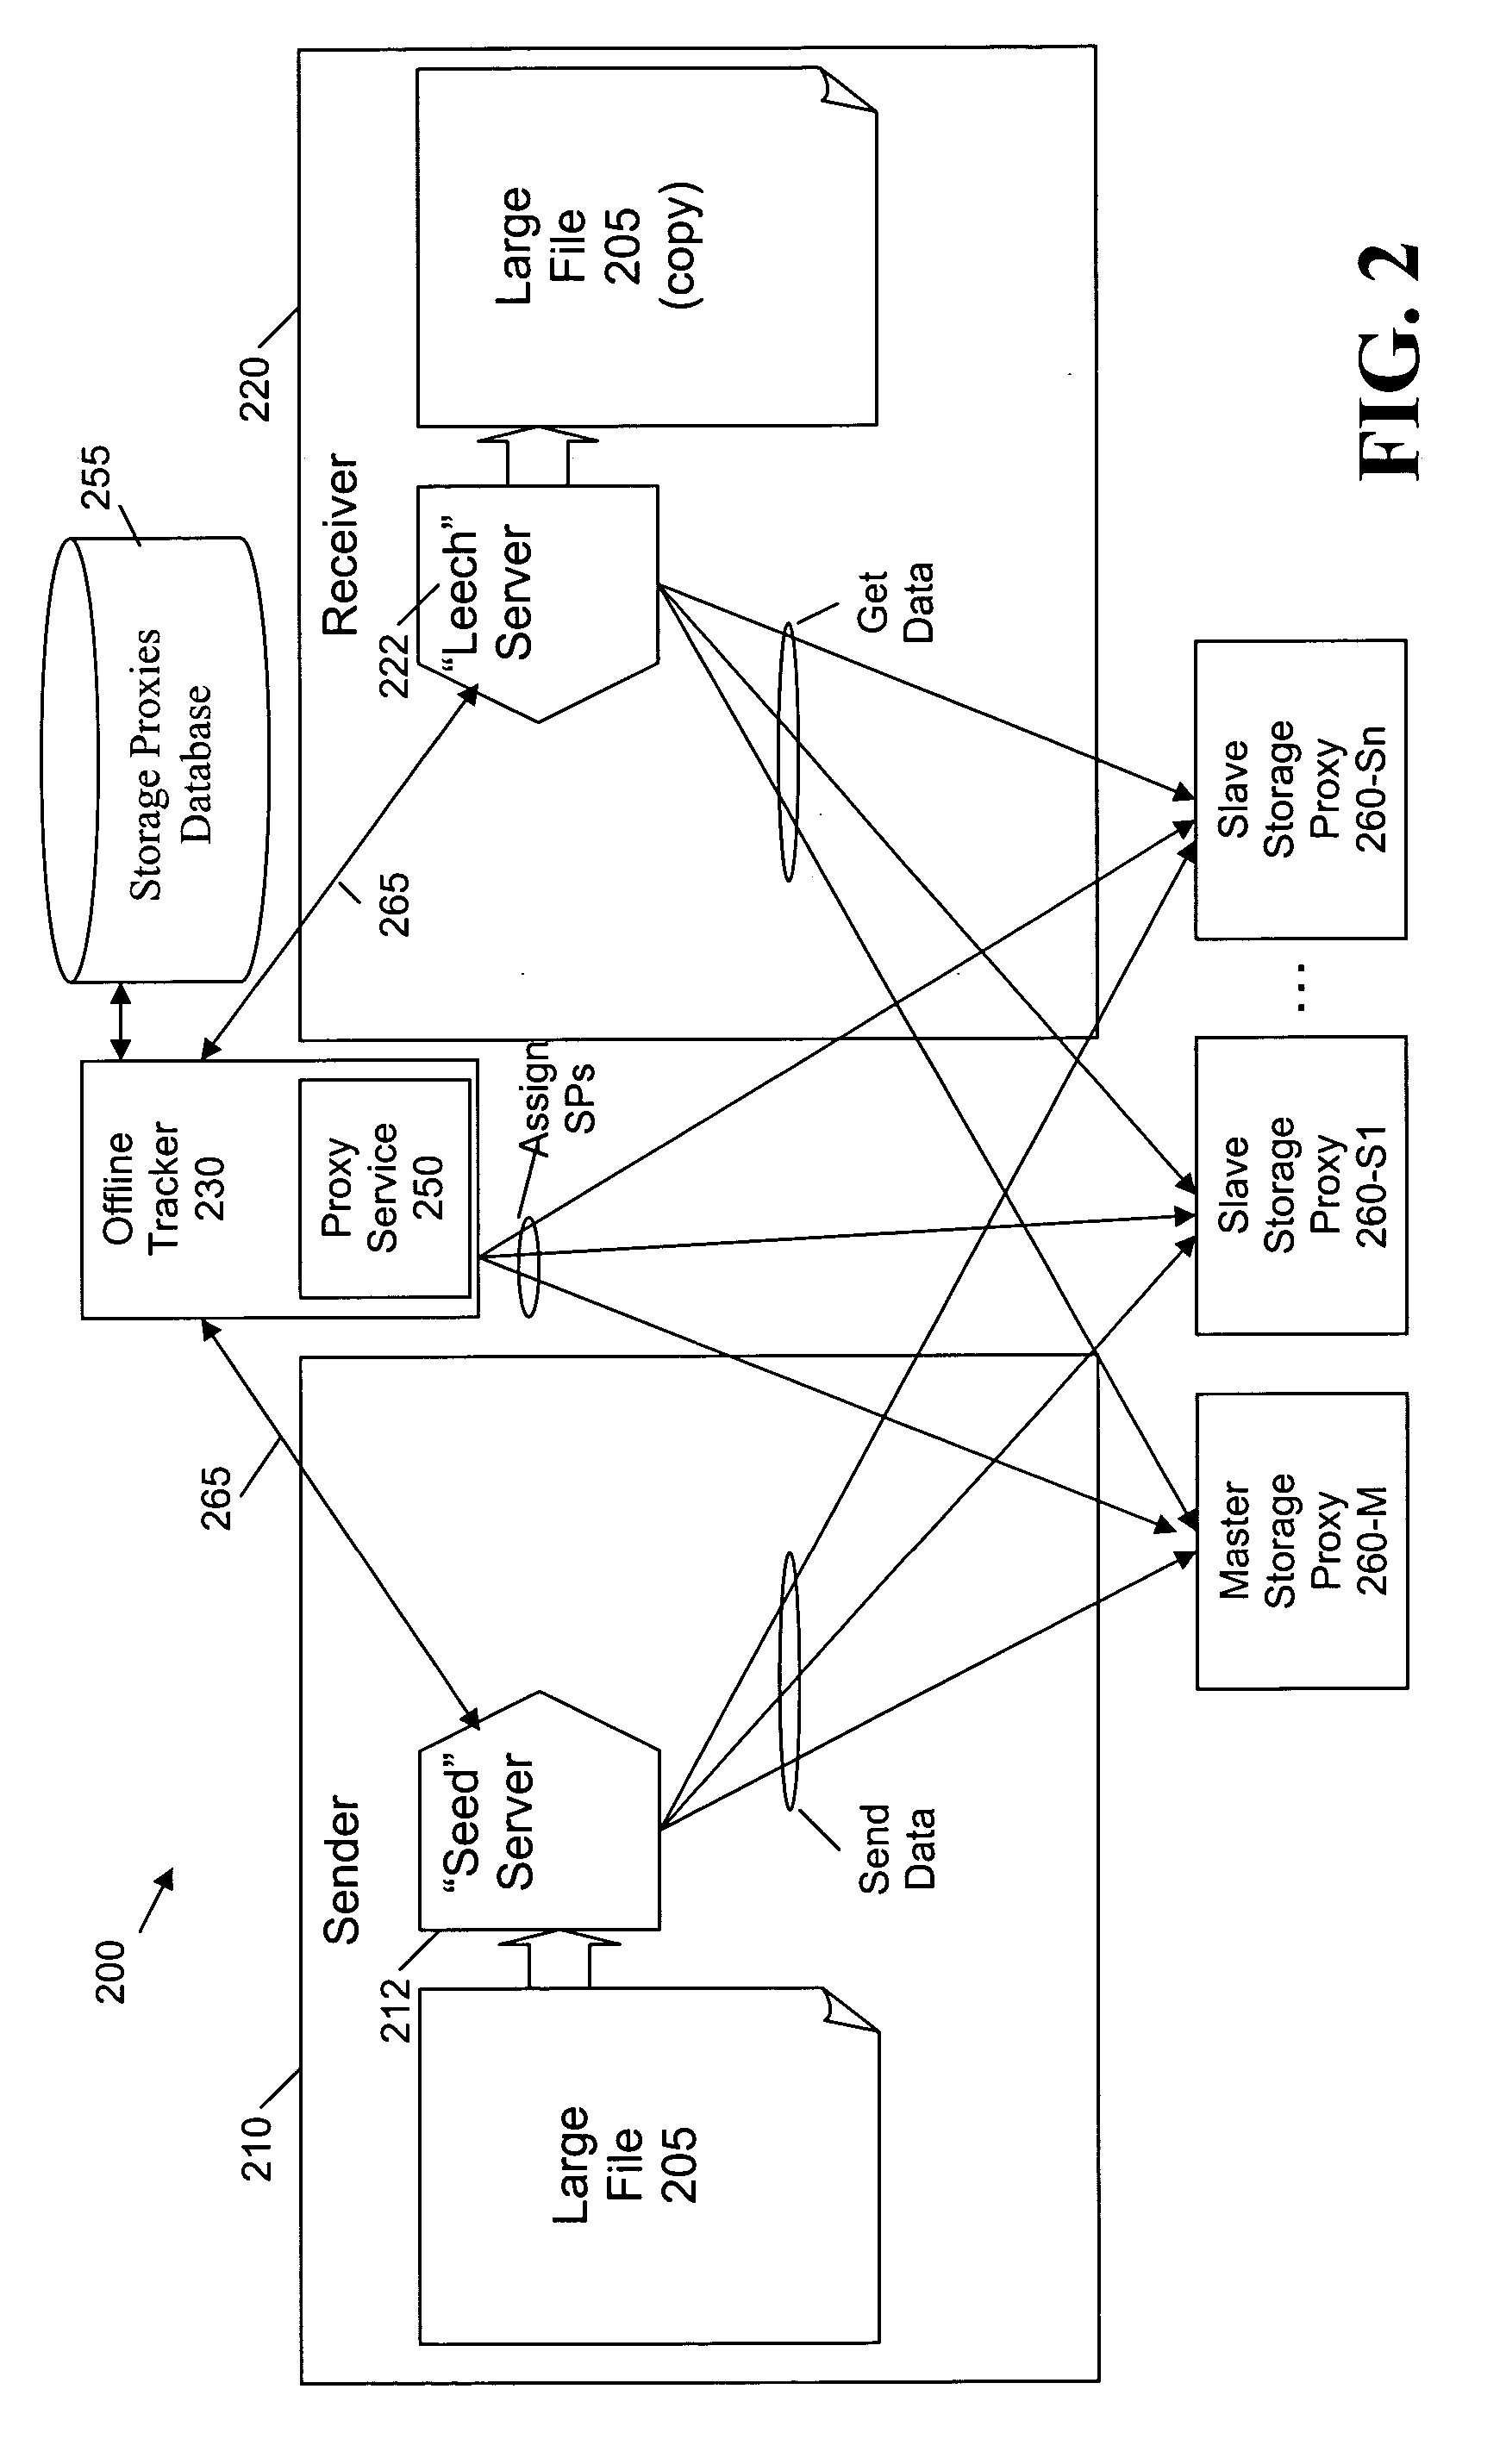 Method and apparatus for offline cooperative file distribution using cache nodes